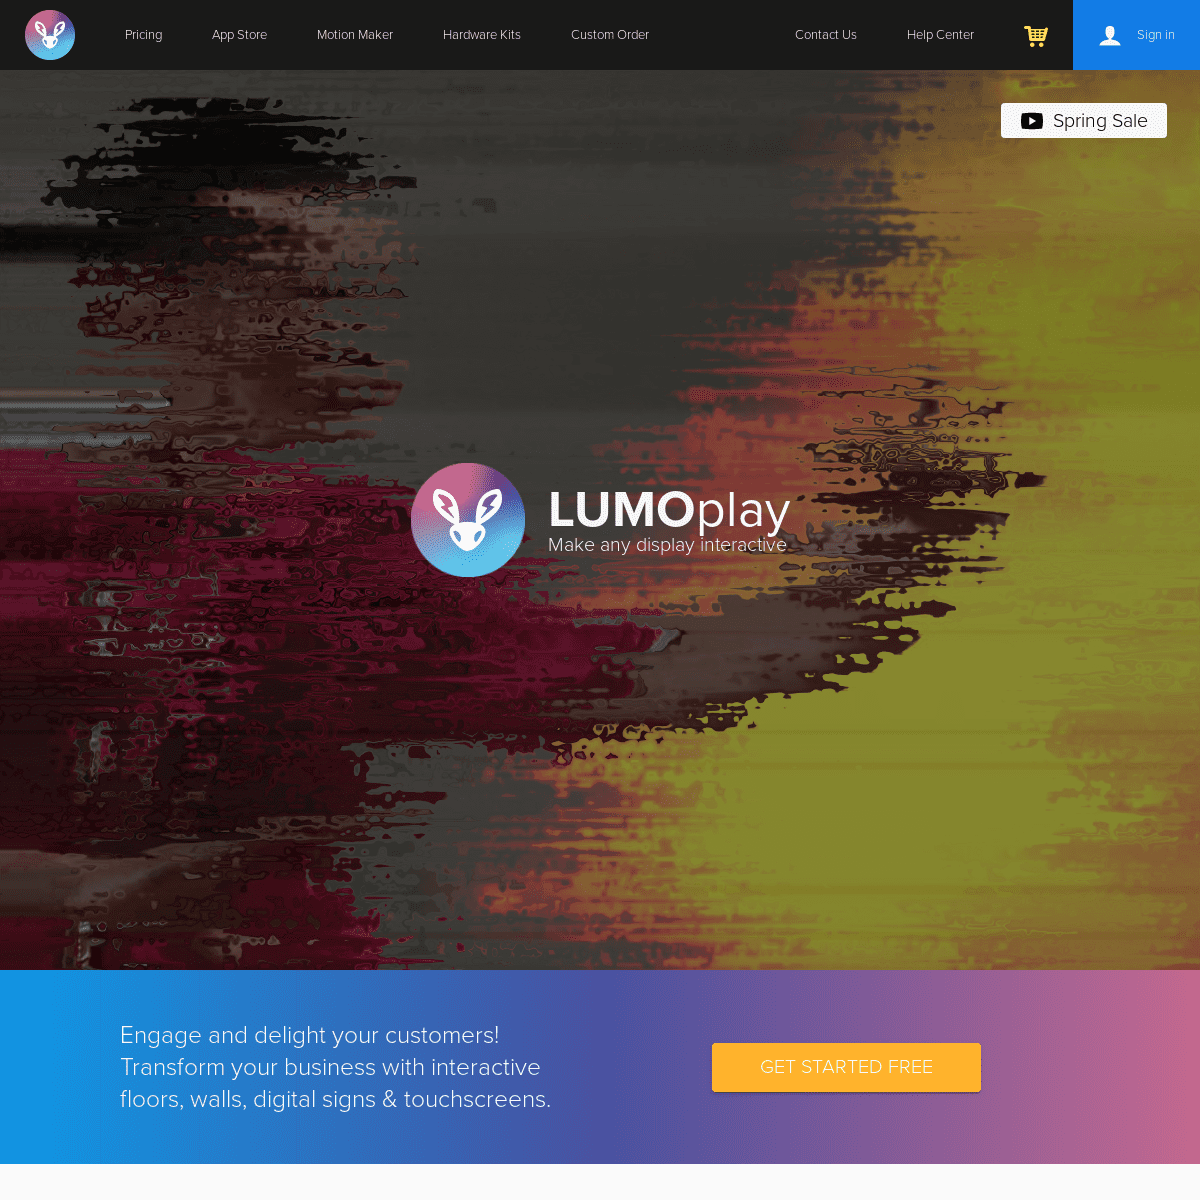 A complete backup of lumoplay.com